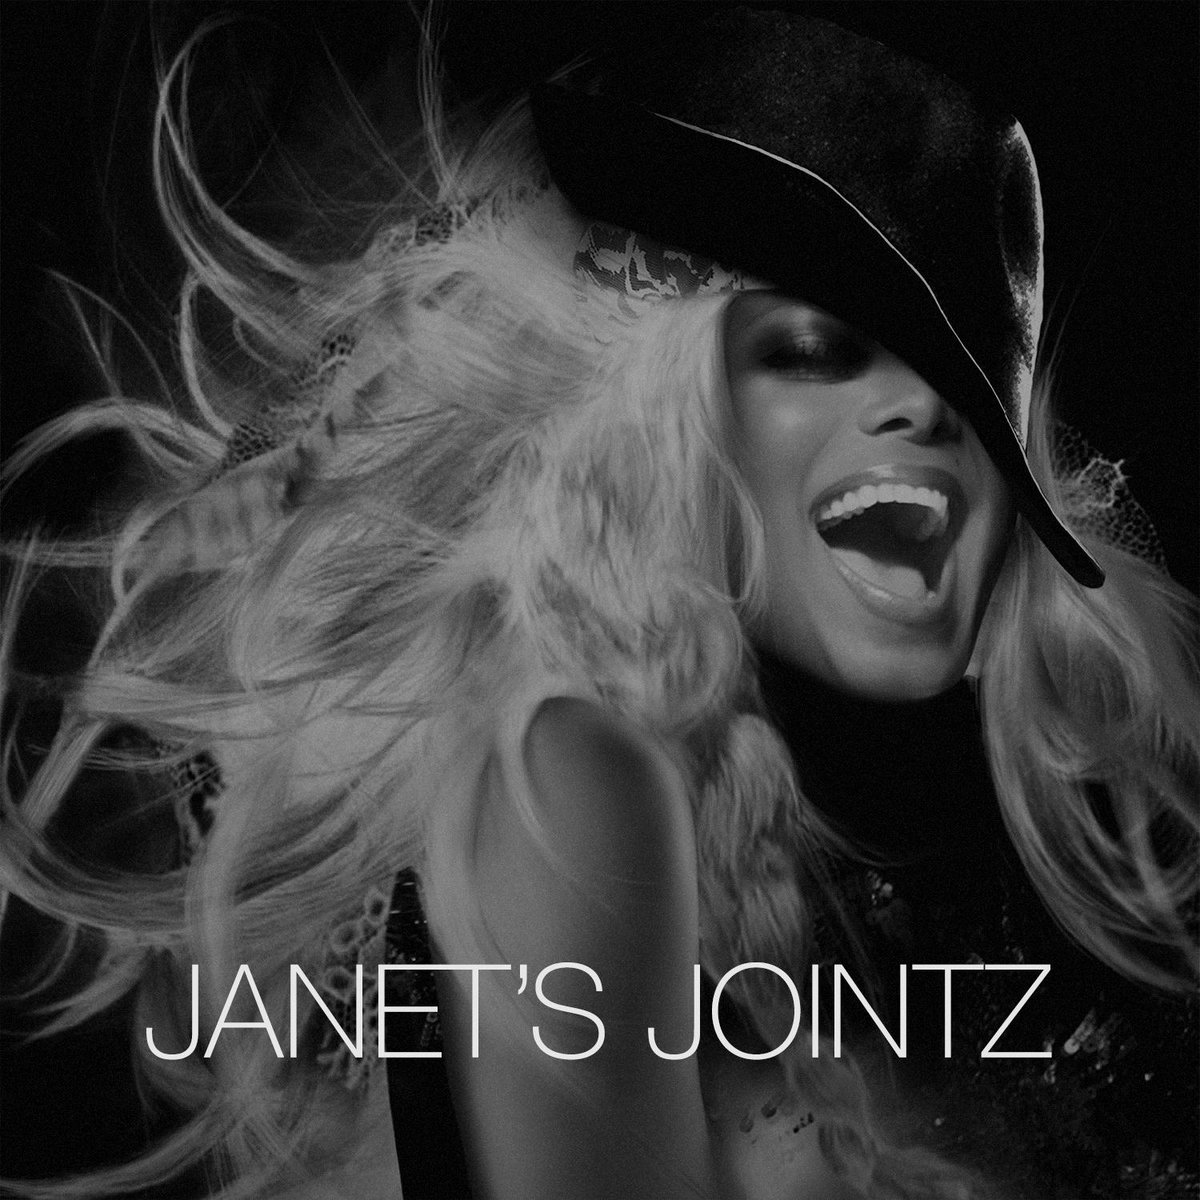 #BURNITUP! feat. @MissyElliott has been added to the Janet’s Jointz playlist on @Spotify! http://t.co/6nE65MVMIa http://t.co/cR8XSlOswR